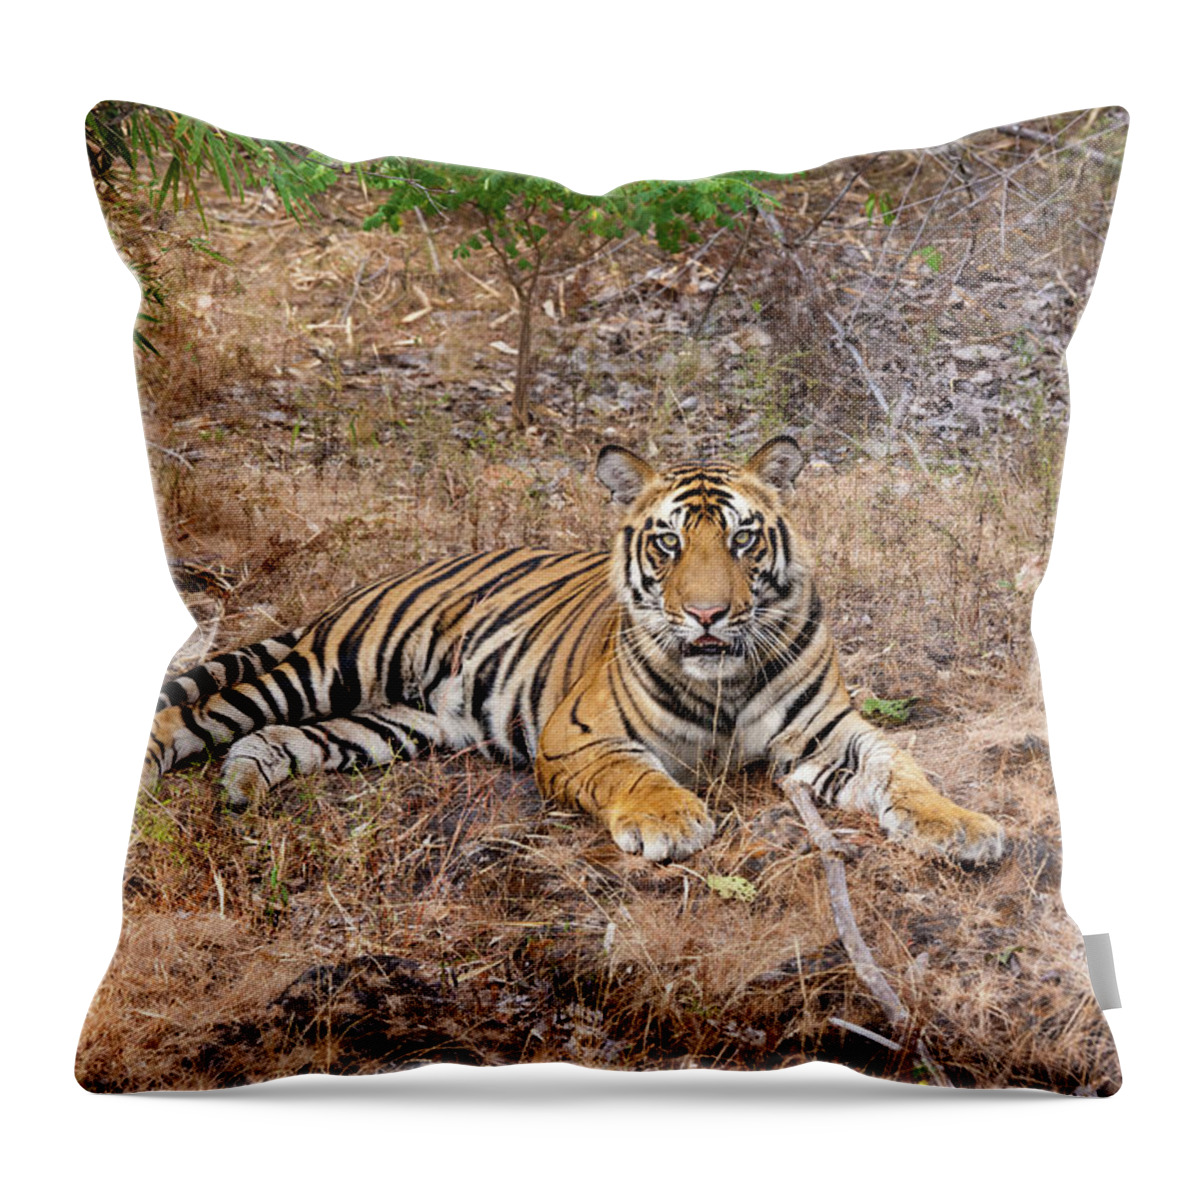 Animal Themes Throw Pillow featuring the photograph A Tiger In Bandhavgarh National Park by Mint Images - Art Wolfe